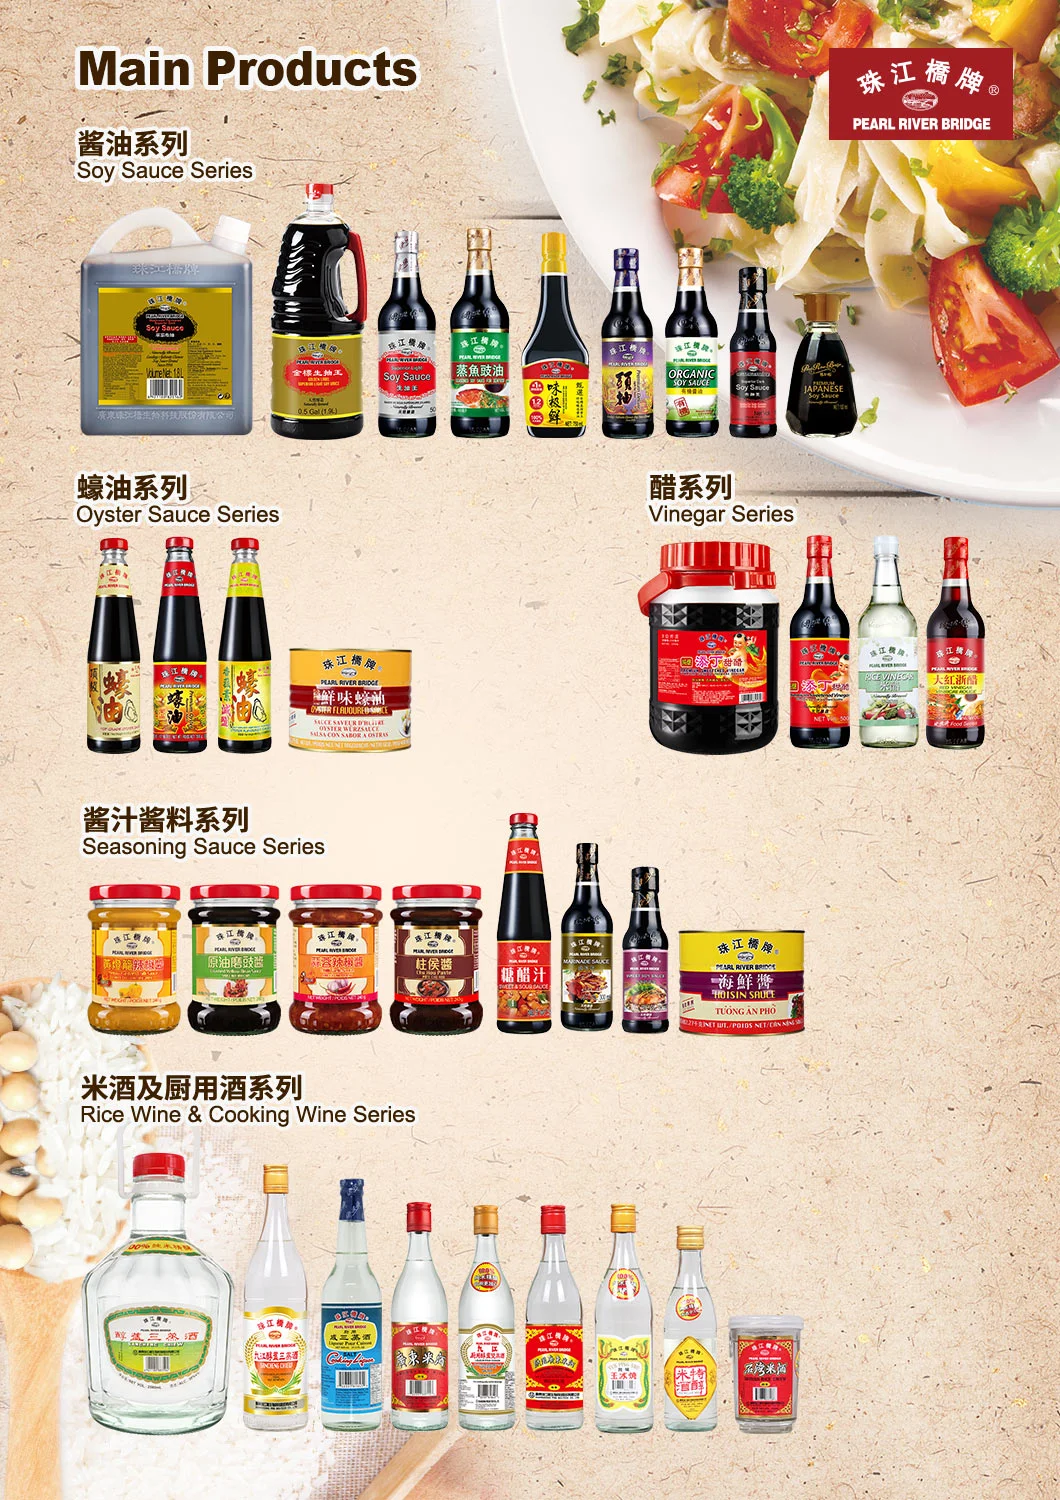 Pearl River Bridge Premium Delicious Soy Sauce 750ml Healthy and High Quality Food Additive